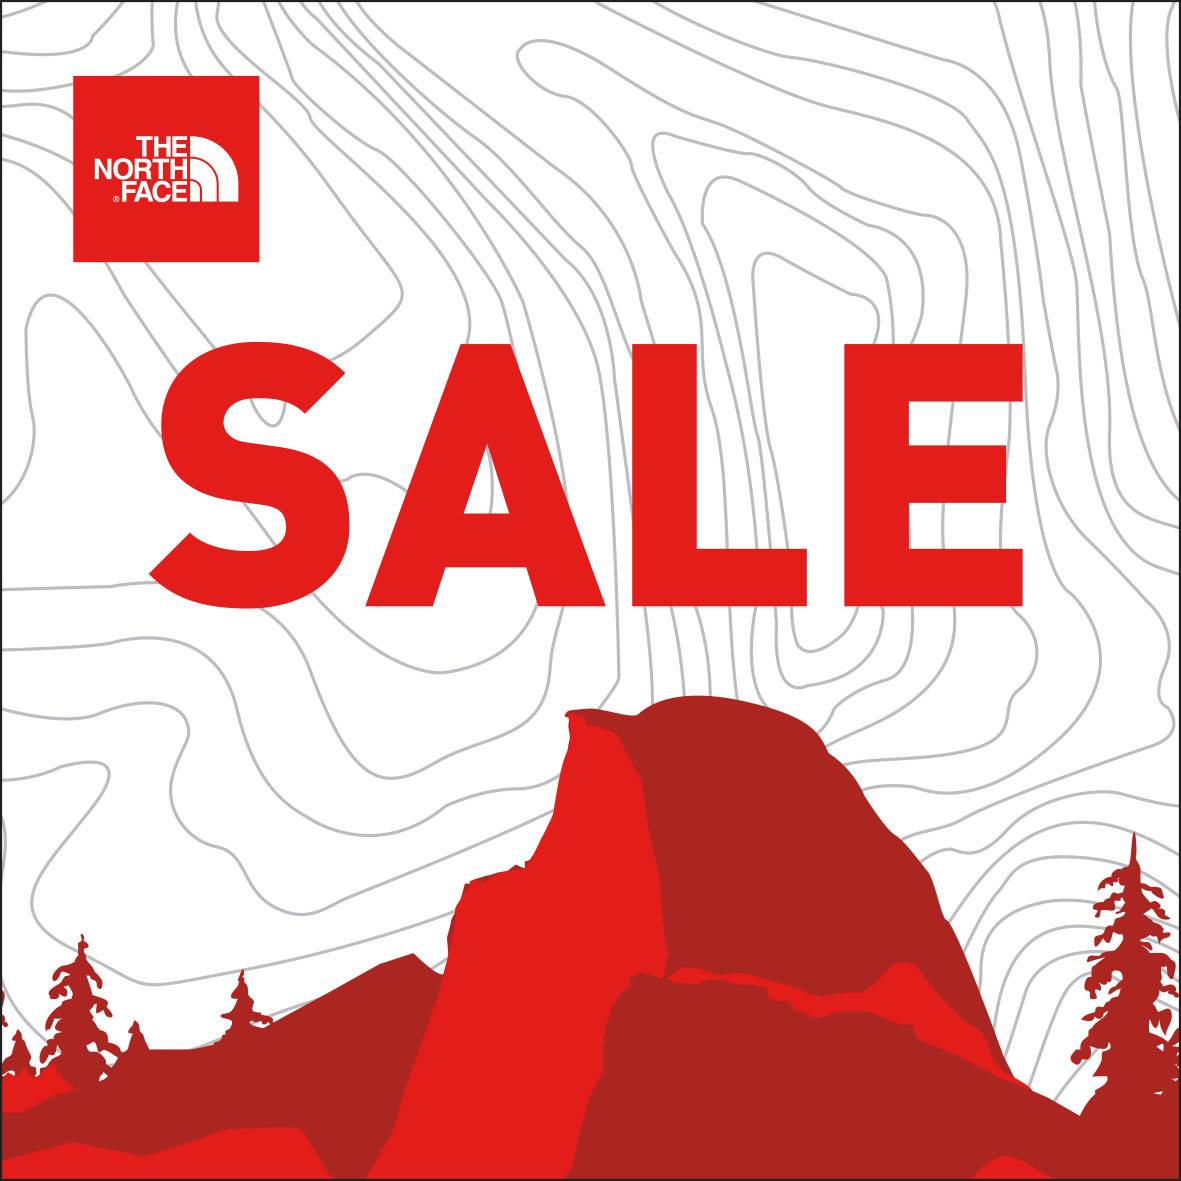 The North Face Singapore End Season Sale Up to 50% Off Promotion ends 4 Sep 2016